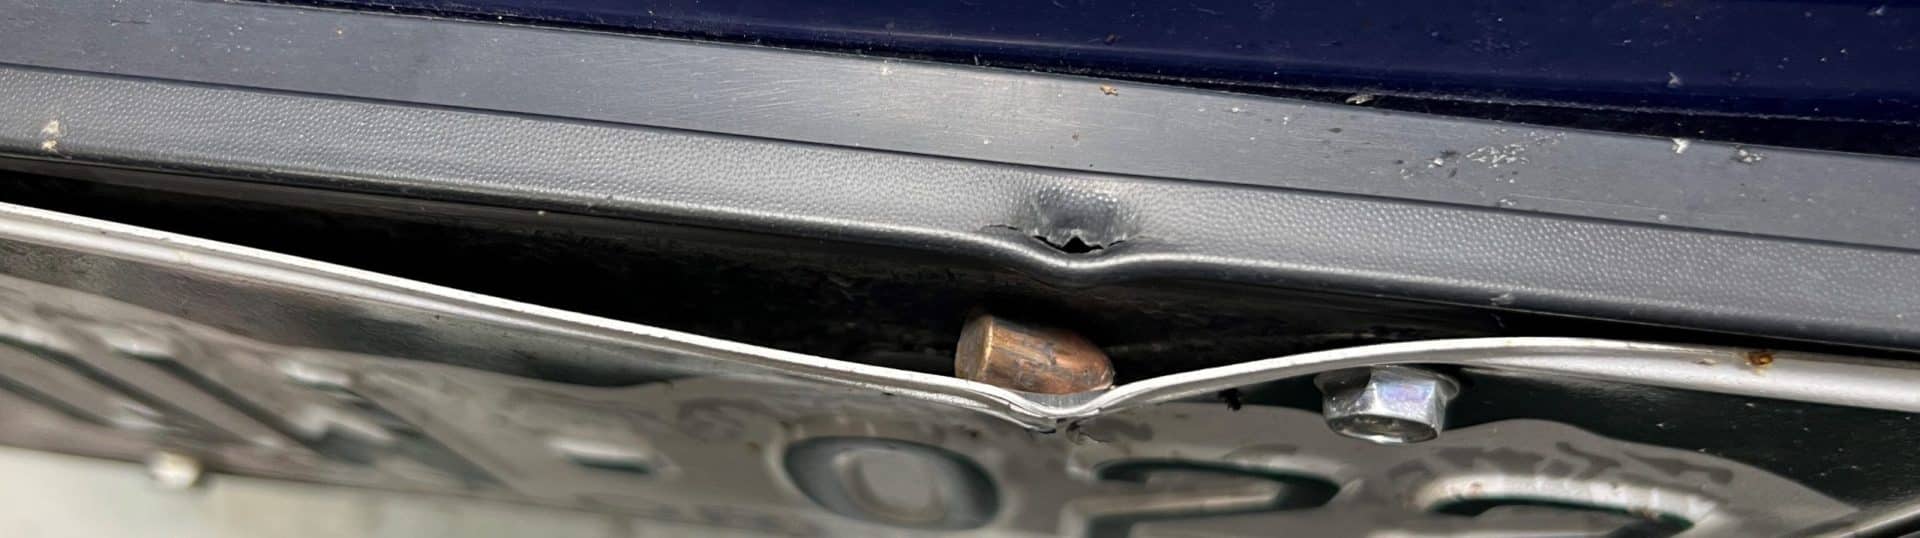 A mostly intact 9mm bullet that fell from the sky embedded in a license plate